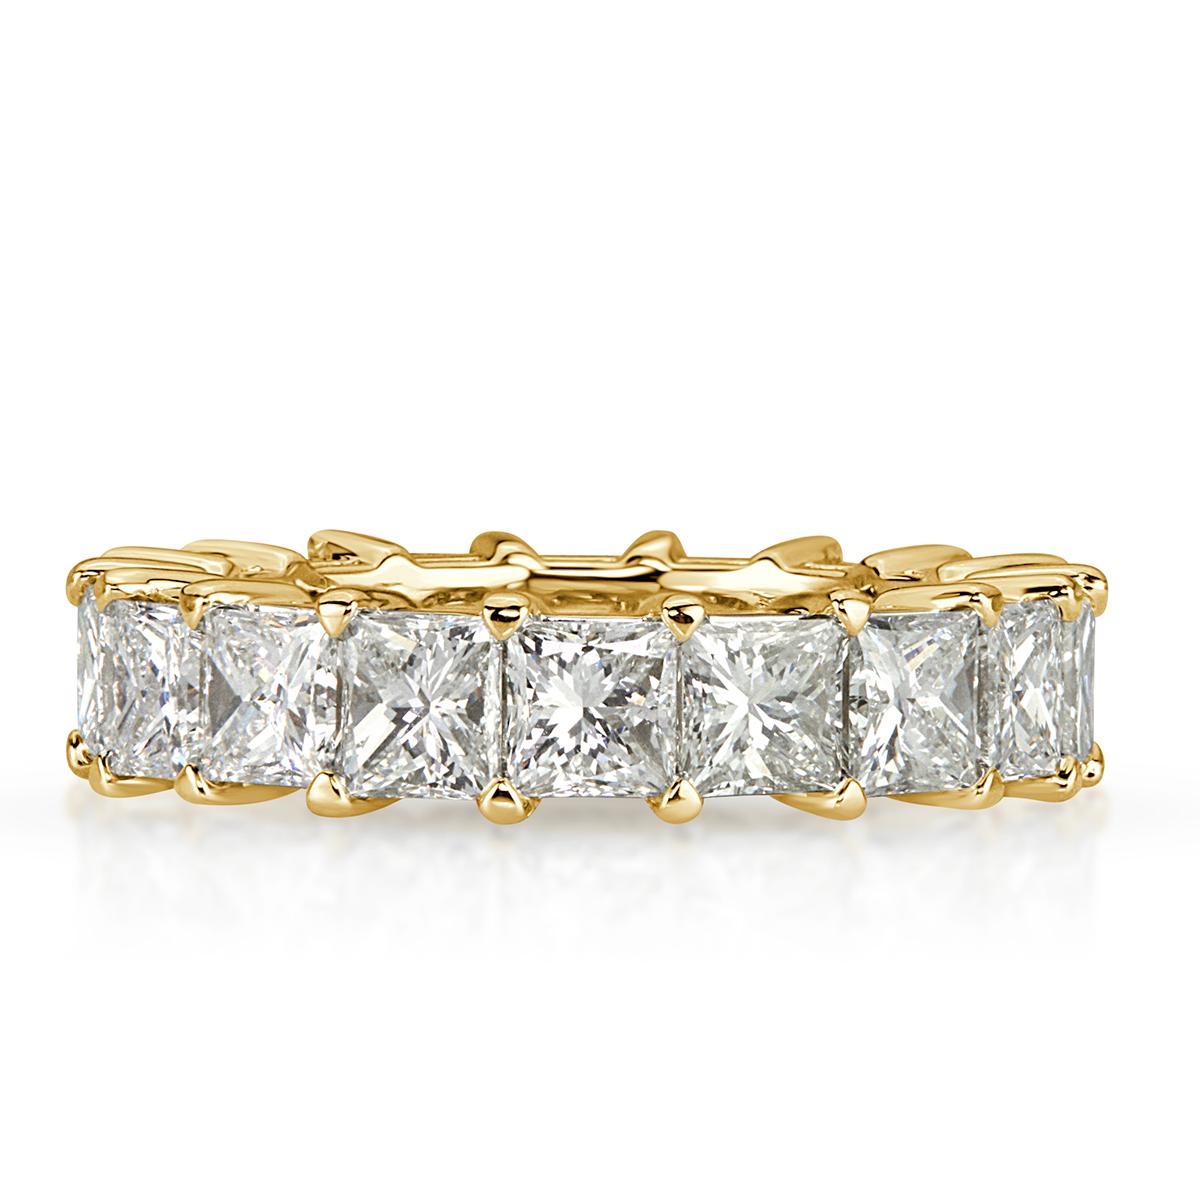 Mark Broumand 6.34 Carat Princess Cut Diamond Eternity Band in 18 Karat Gold In New Condition For Sale In Los Angeles, CA